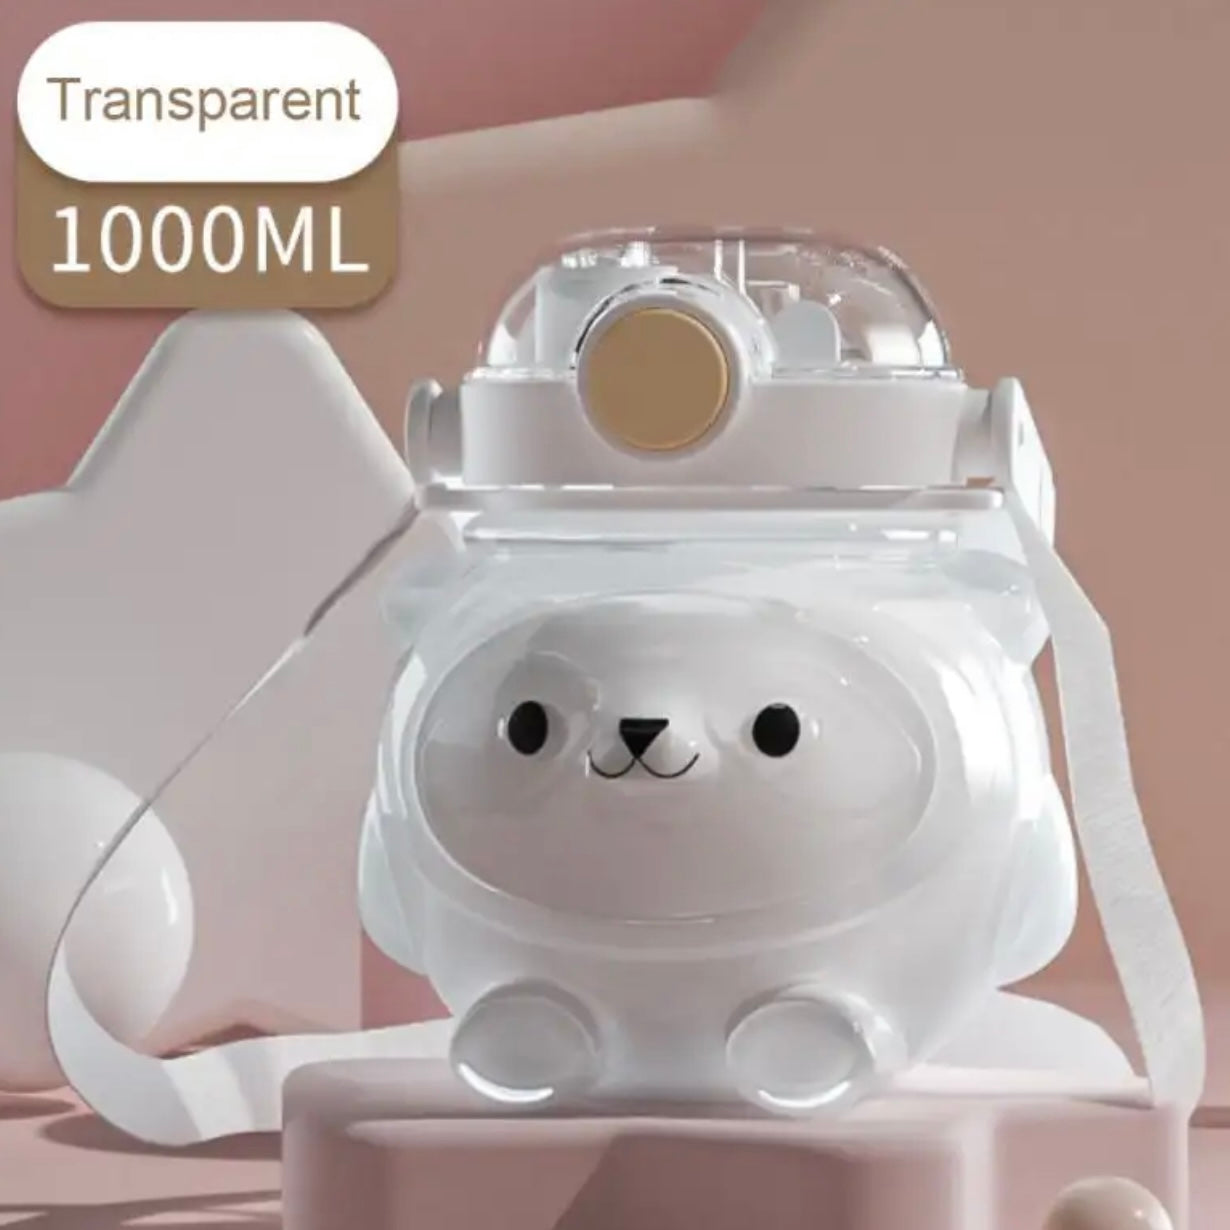 Super Cute 1000ml Kawaii Travel Tumbler, Water Bottle, Kids Cup, Juice Cup, Kitchenware Cup, Practical Gift For Kids And Adults